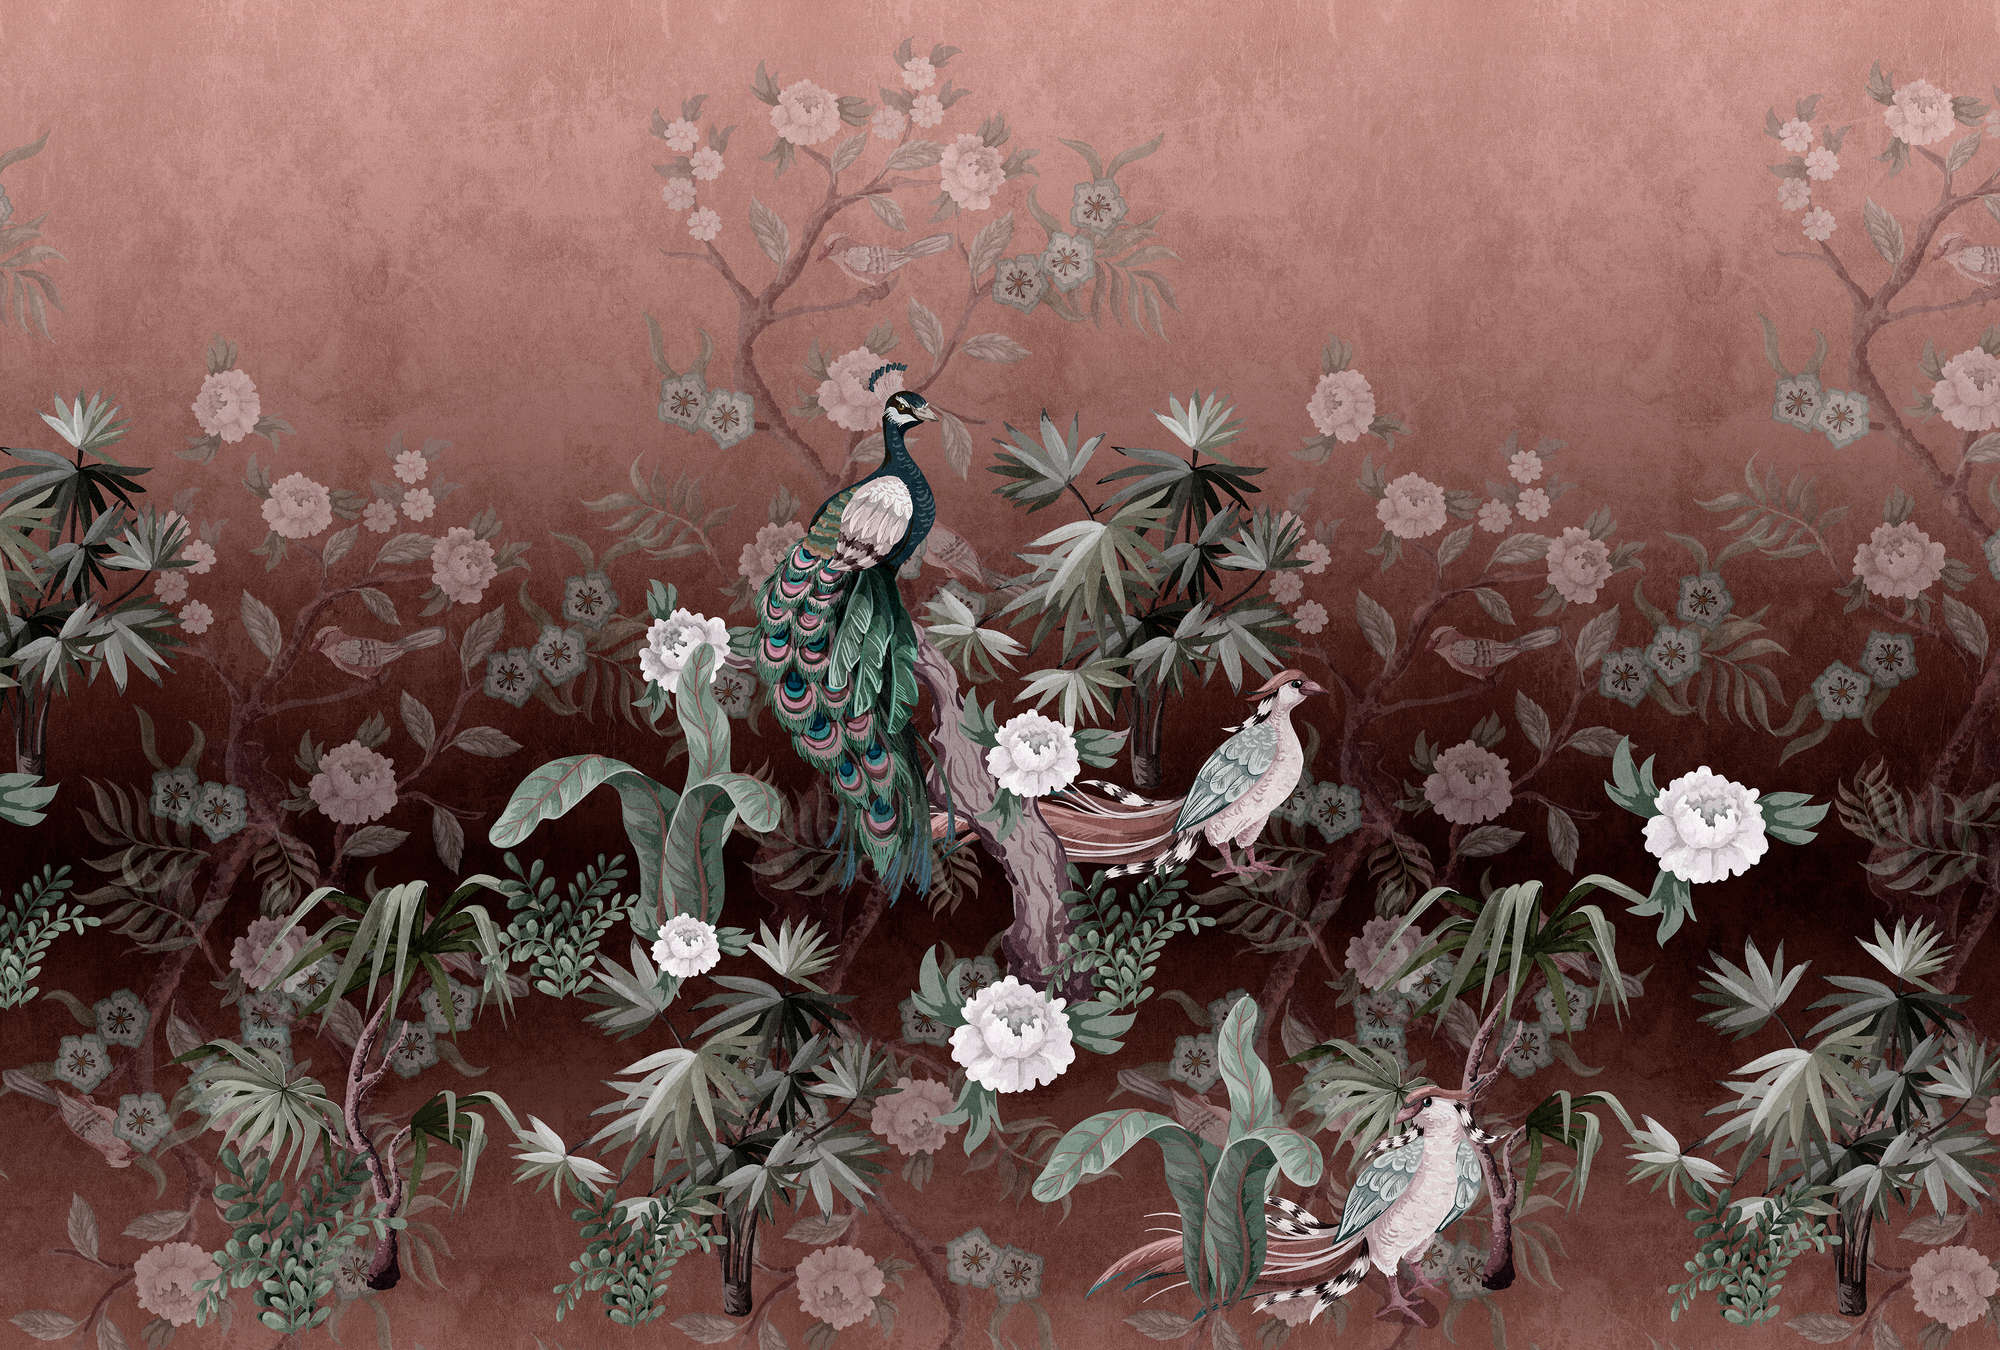             Peacock Island 1 - wall mural peacock garden with flowers in antique pink
        